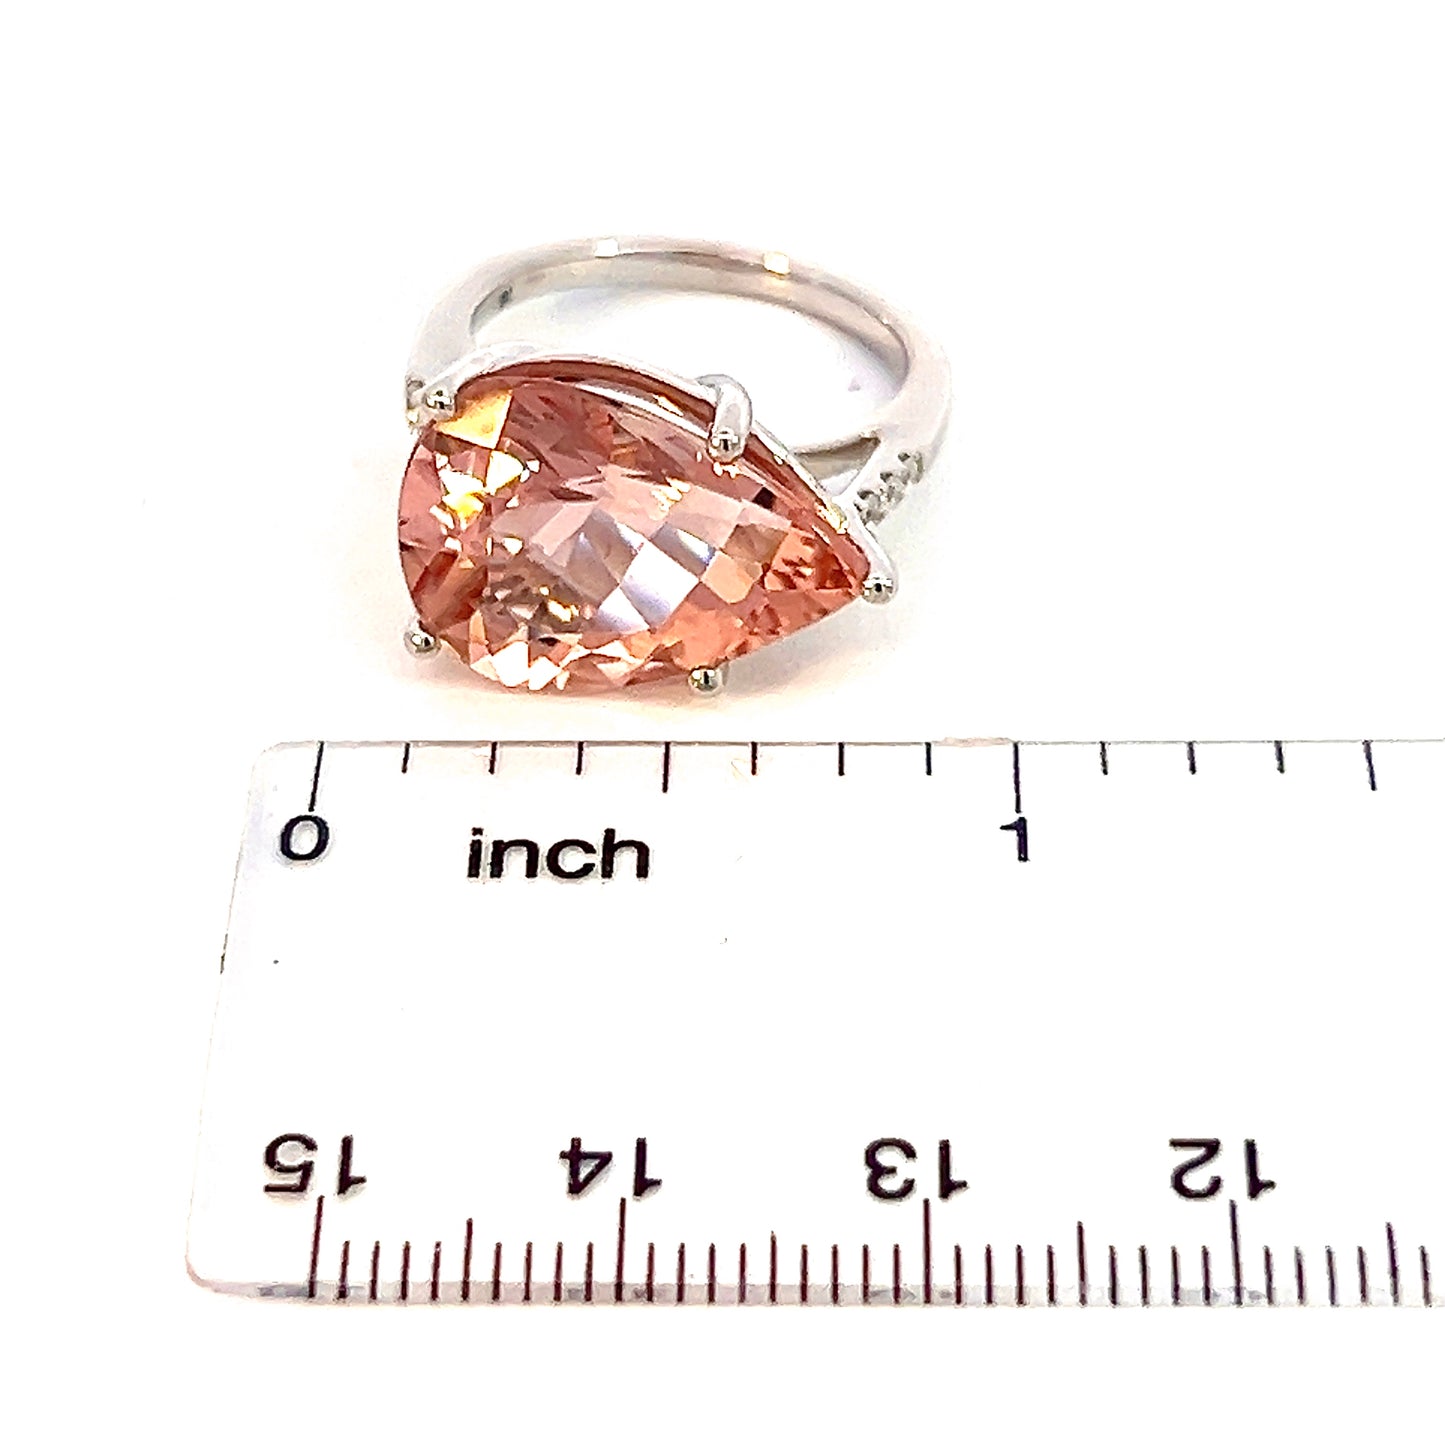 Natural Morganite Diamond Ring 6.5 14k White Gold 8.99 TCW Certified $5,950 310650 - Certified Fine Jewelry